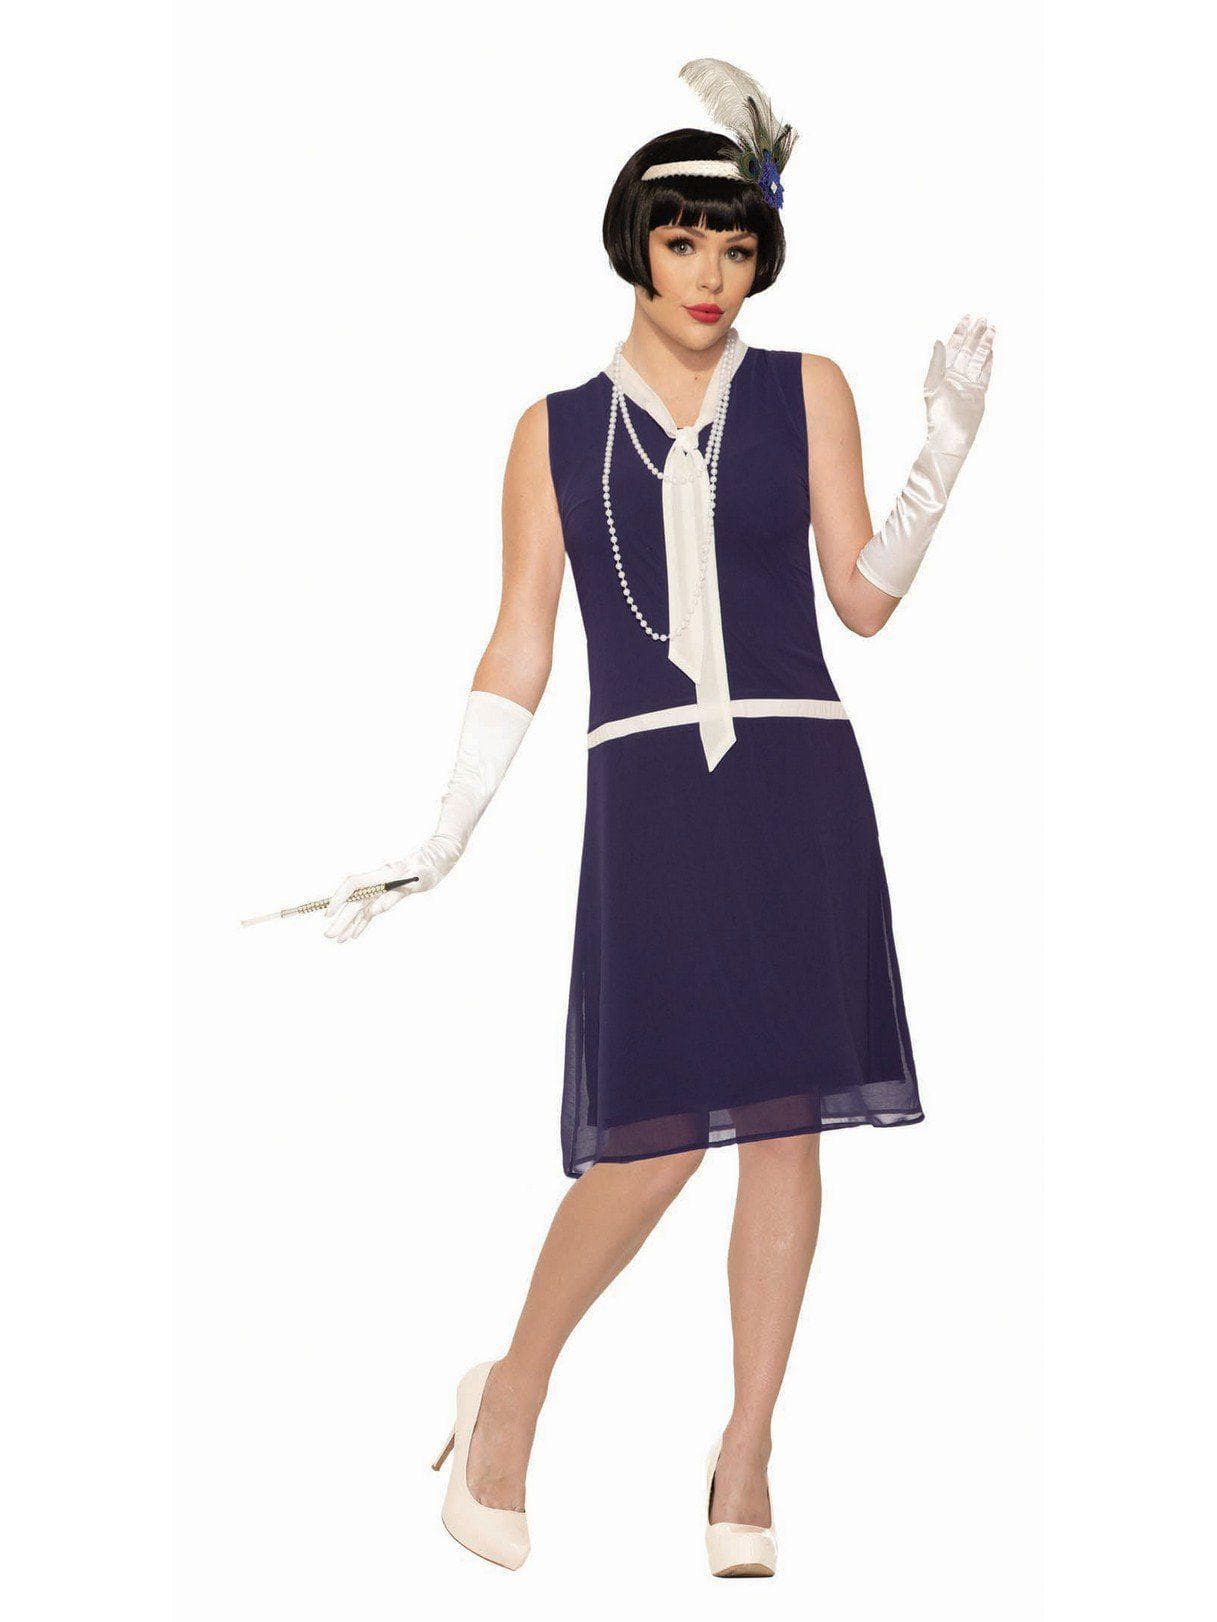 Adult Day Dreaming Daisy Costume - costumes.com